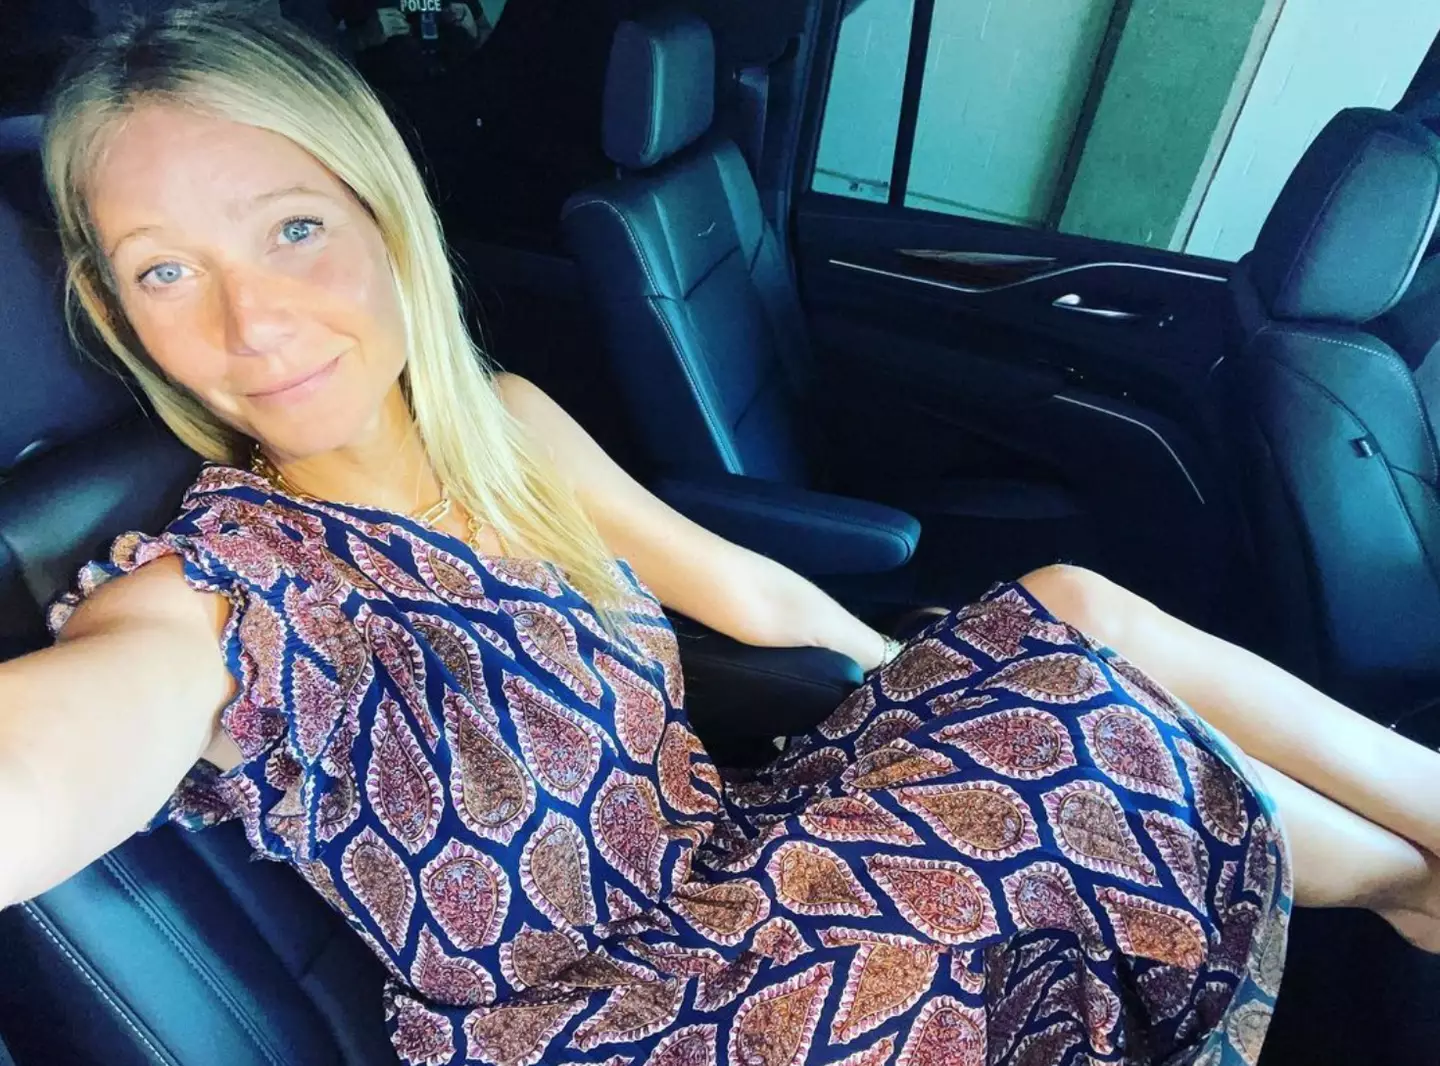 Gwyneth has spoken about her love life.